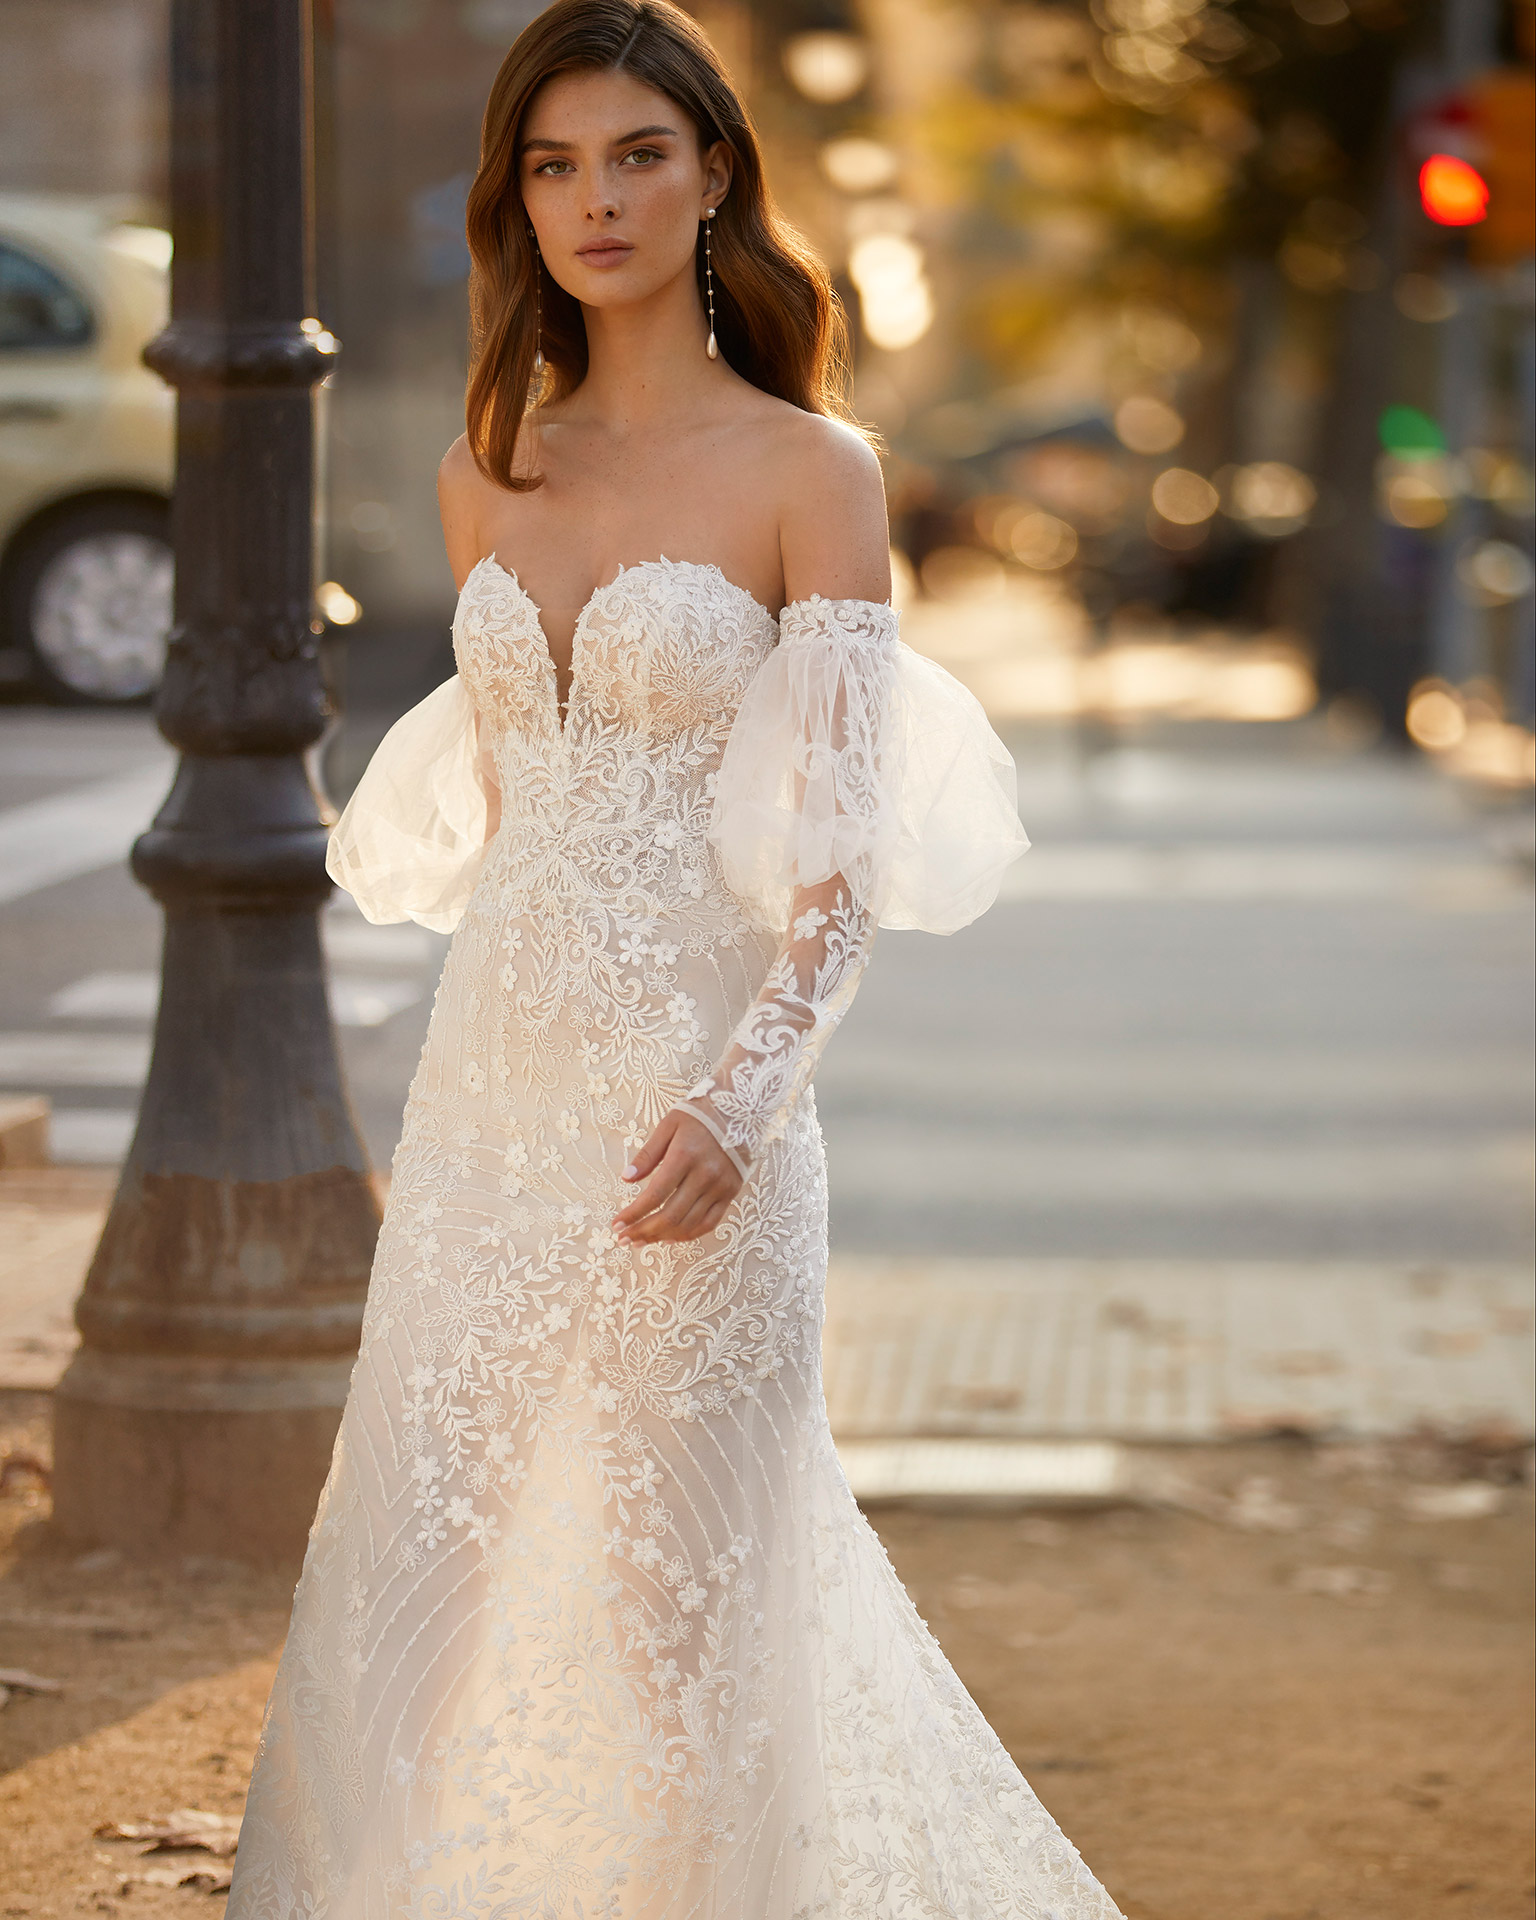 Romantic mermaid-style wedding dress, made of lace, with matching puffed sleeves; with a push-up corset structure, a button-up back, and long tulle and appliqué sleeves. Unique Luna Novias outfit made of lace with beadwork. LUNA_NOVIAS.